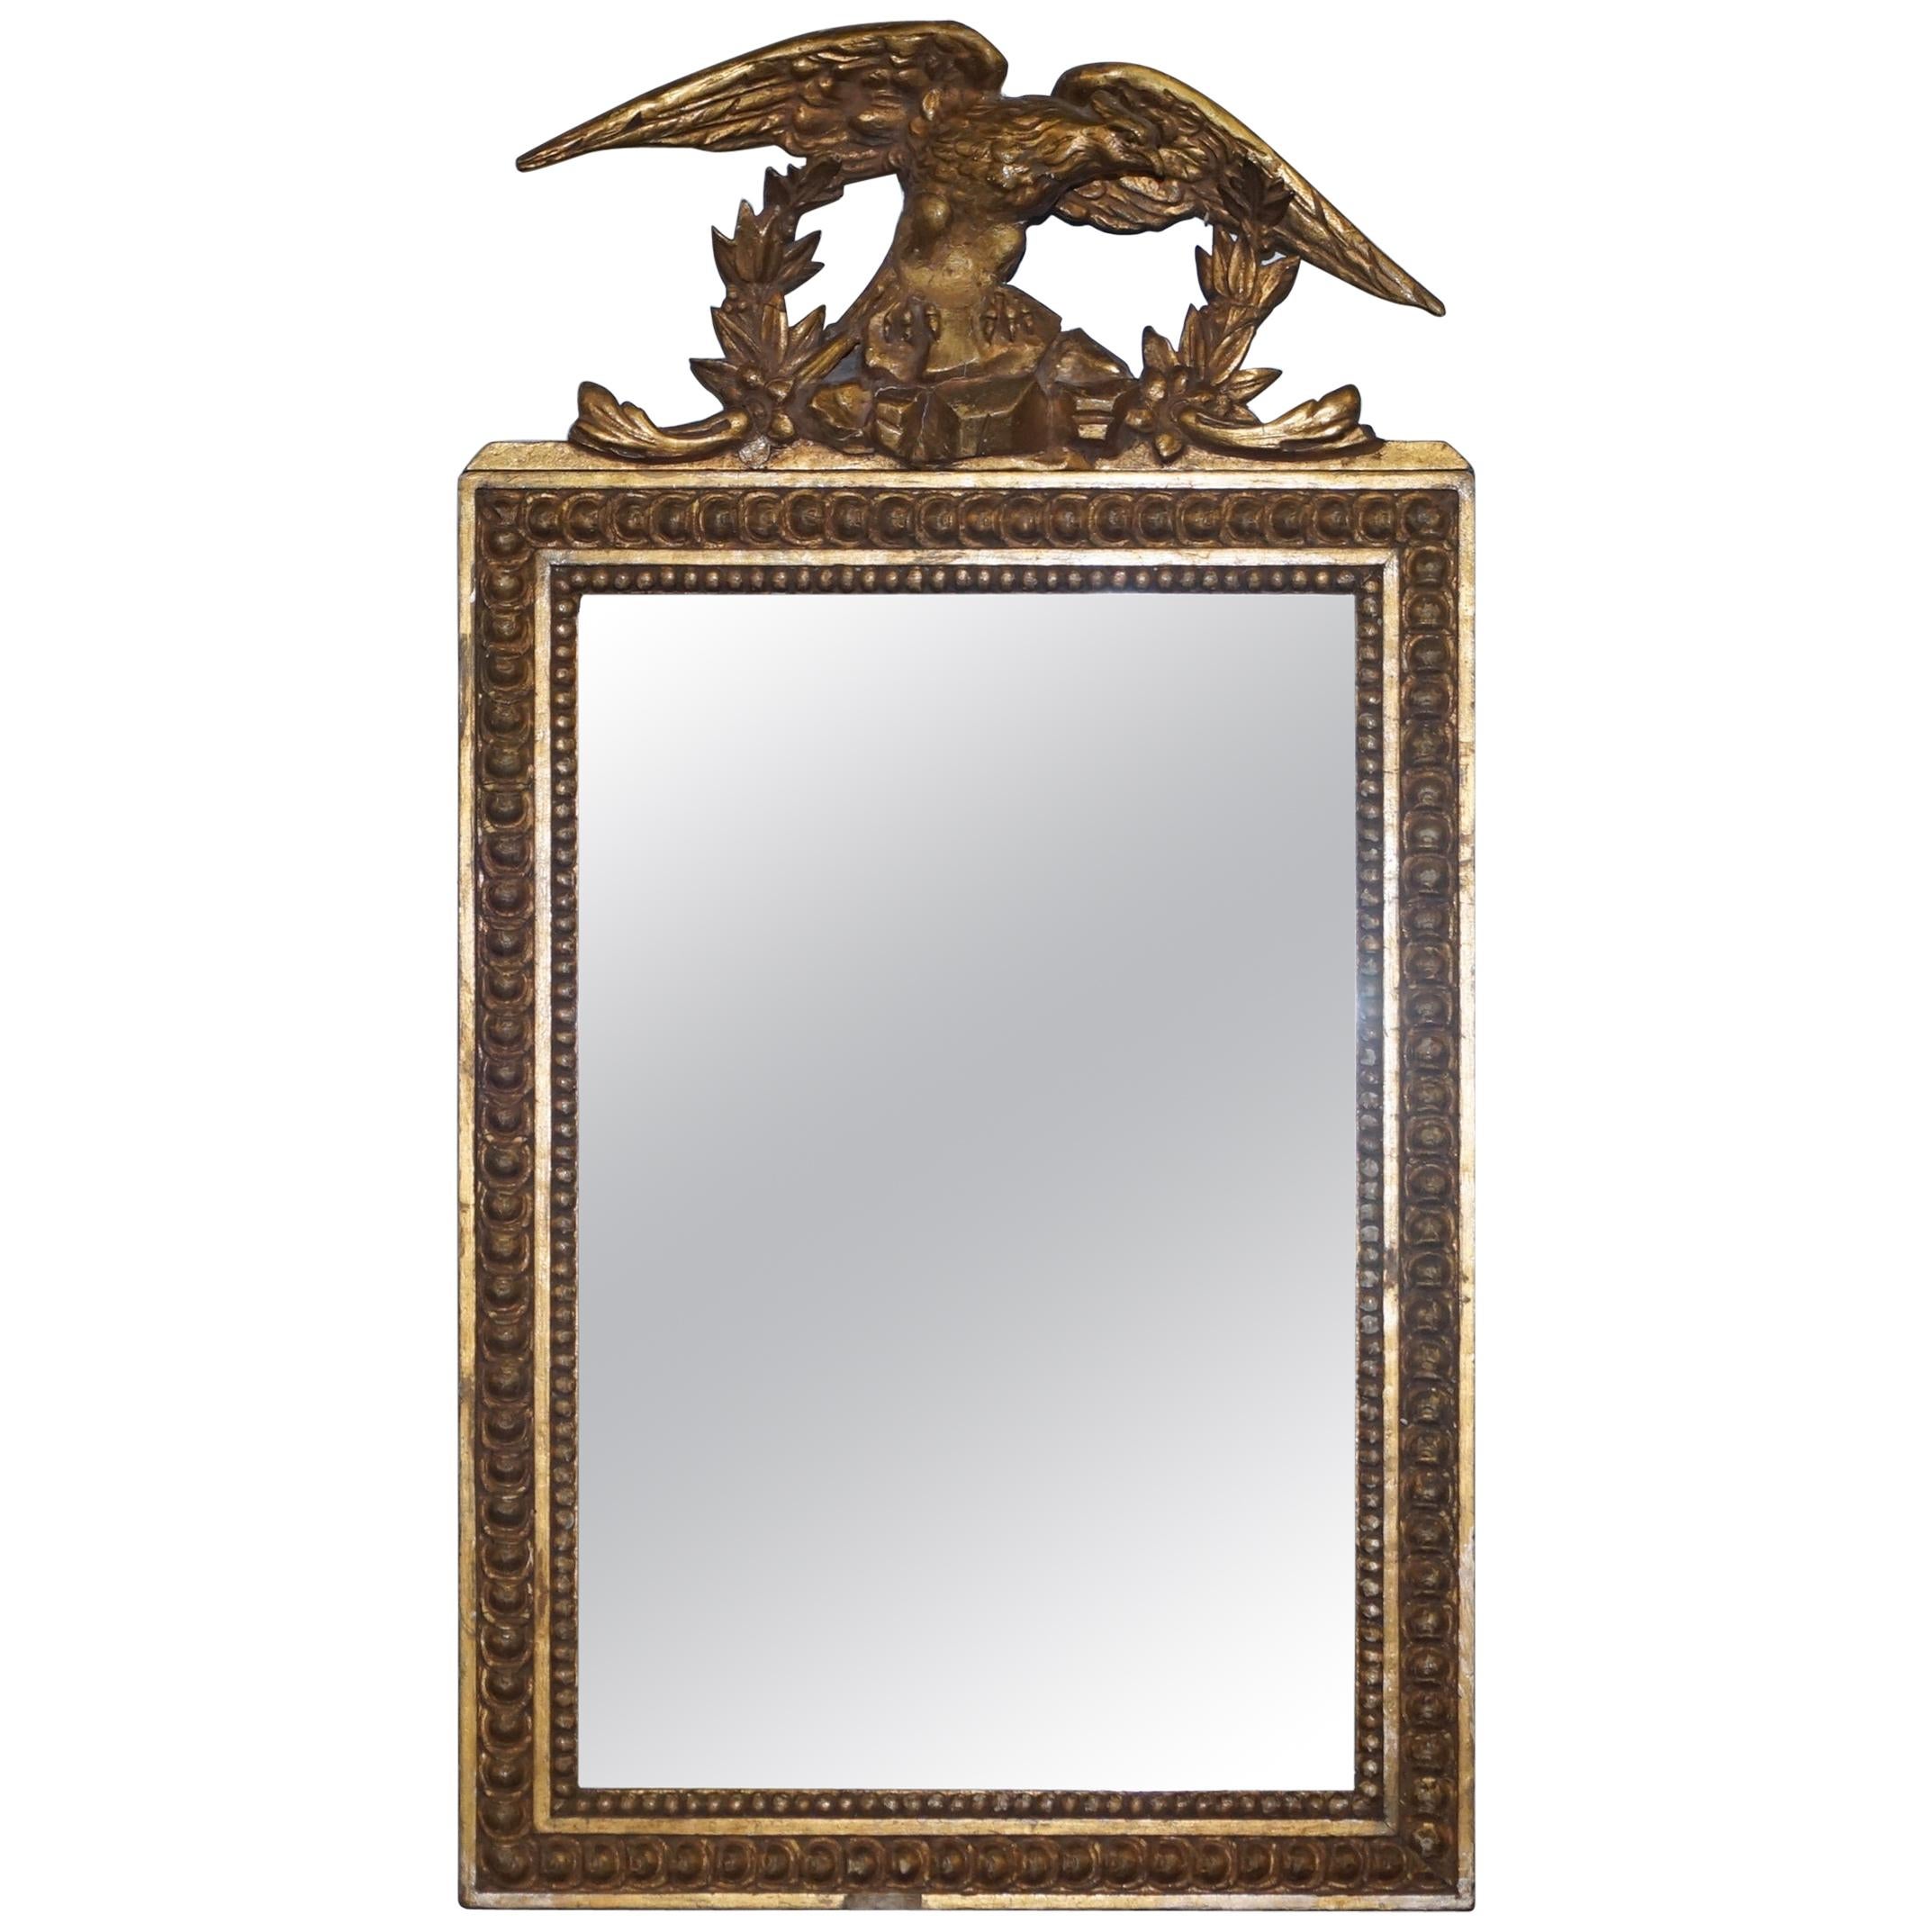 Exquisite Regency Circa 1810-1820 Gilded Gesso Mirror Hand Carved Large Eagle For Sale